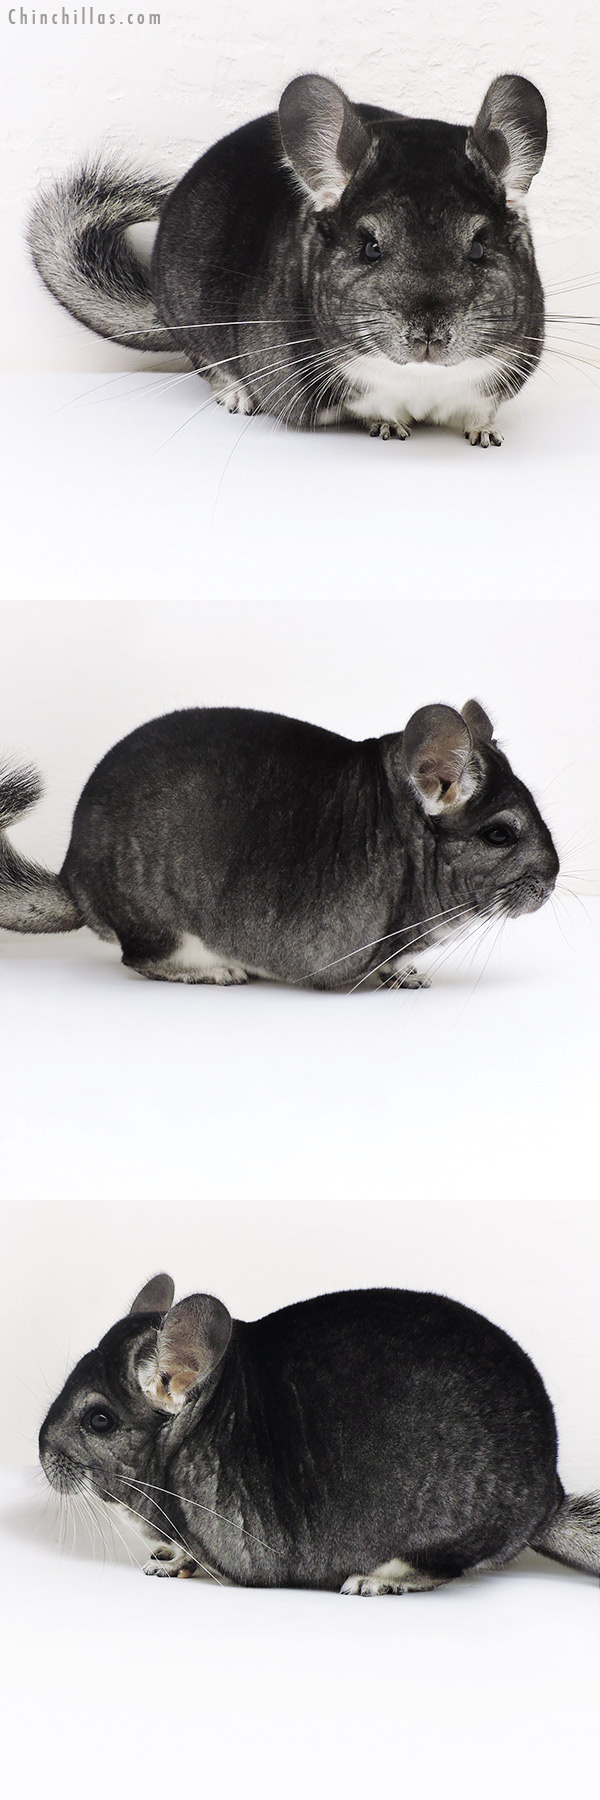 Chinchilla or related item offered for sale or export on Chinchillas.com - 17132 Large Herd Improvement Quality Standard Male Chinchilla